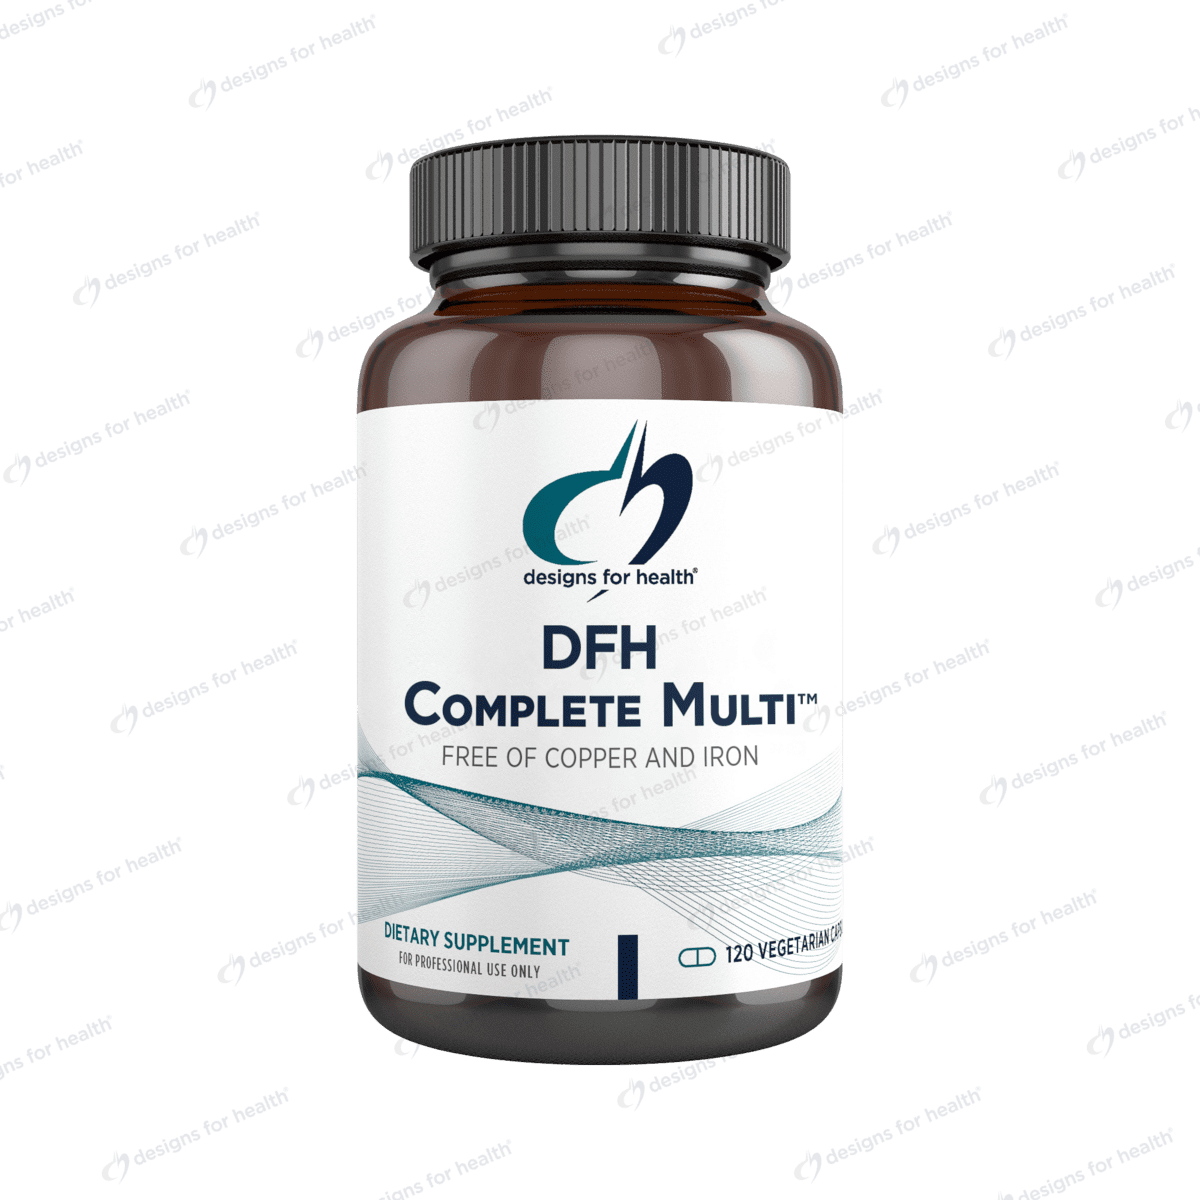 DFH Complete Multi™ (Free of Copper and Iron)